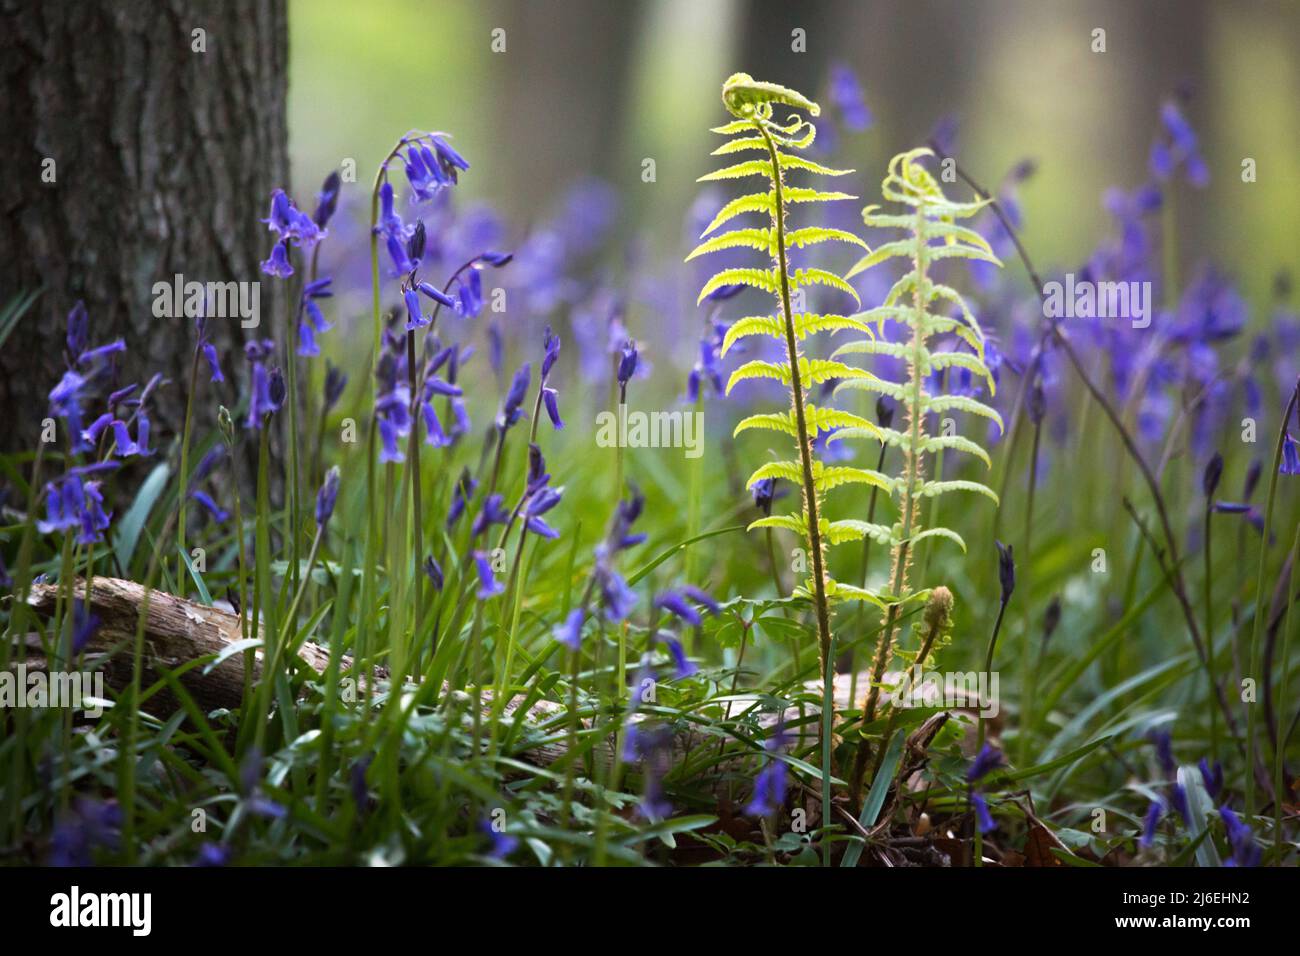 A beautiful blanket of bluebells in an English woodland in spring time in the morning light, with fresh green leaves of unfurling ferns. Stock Photo